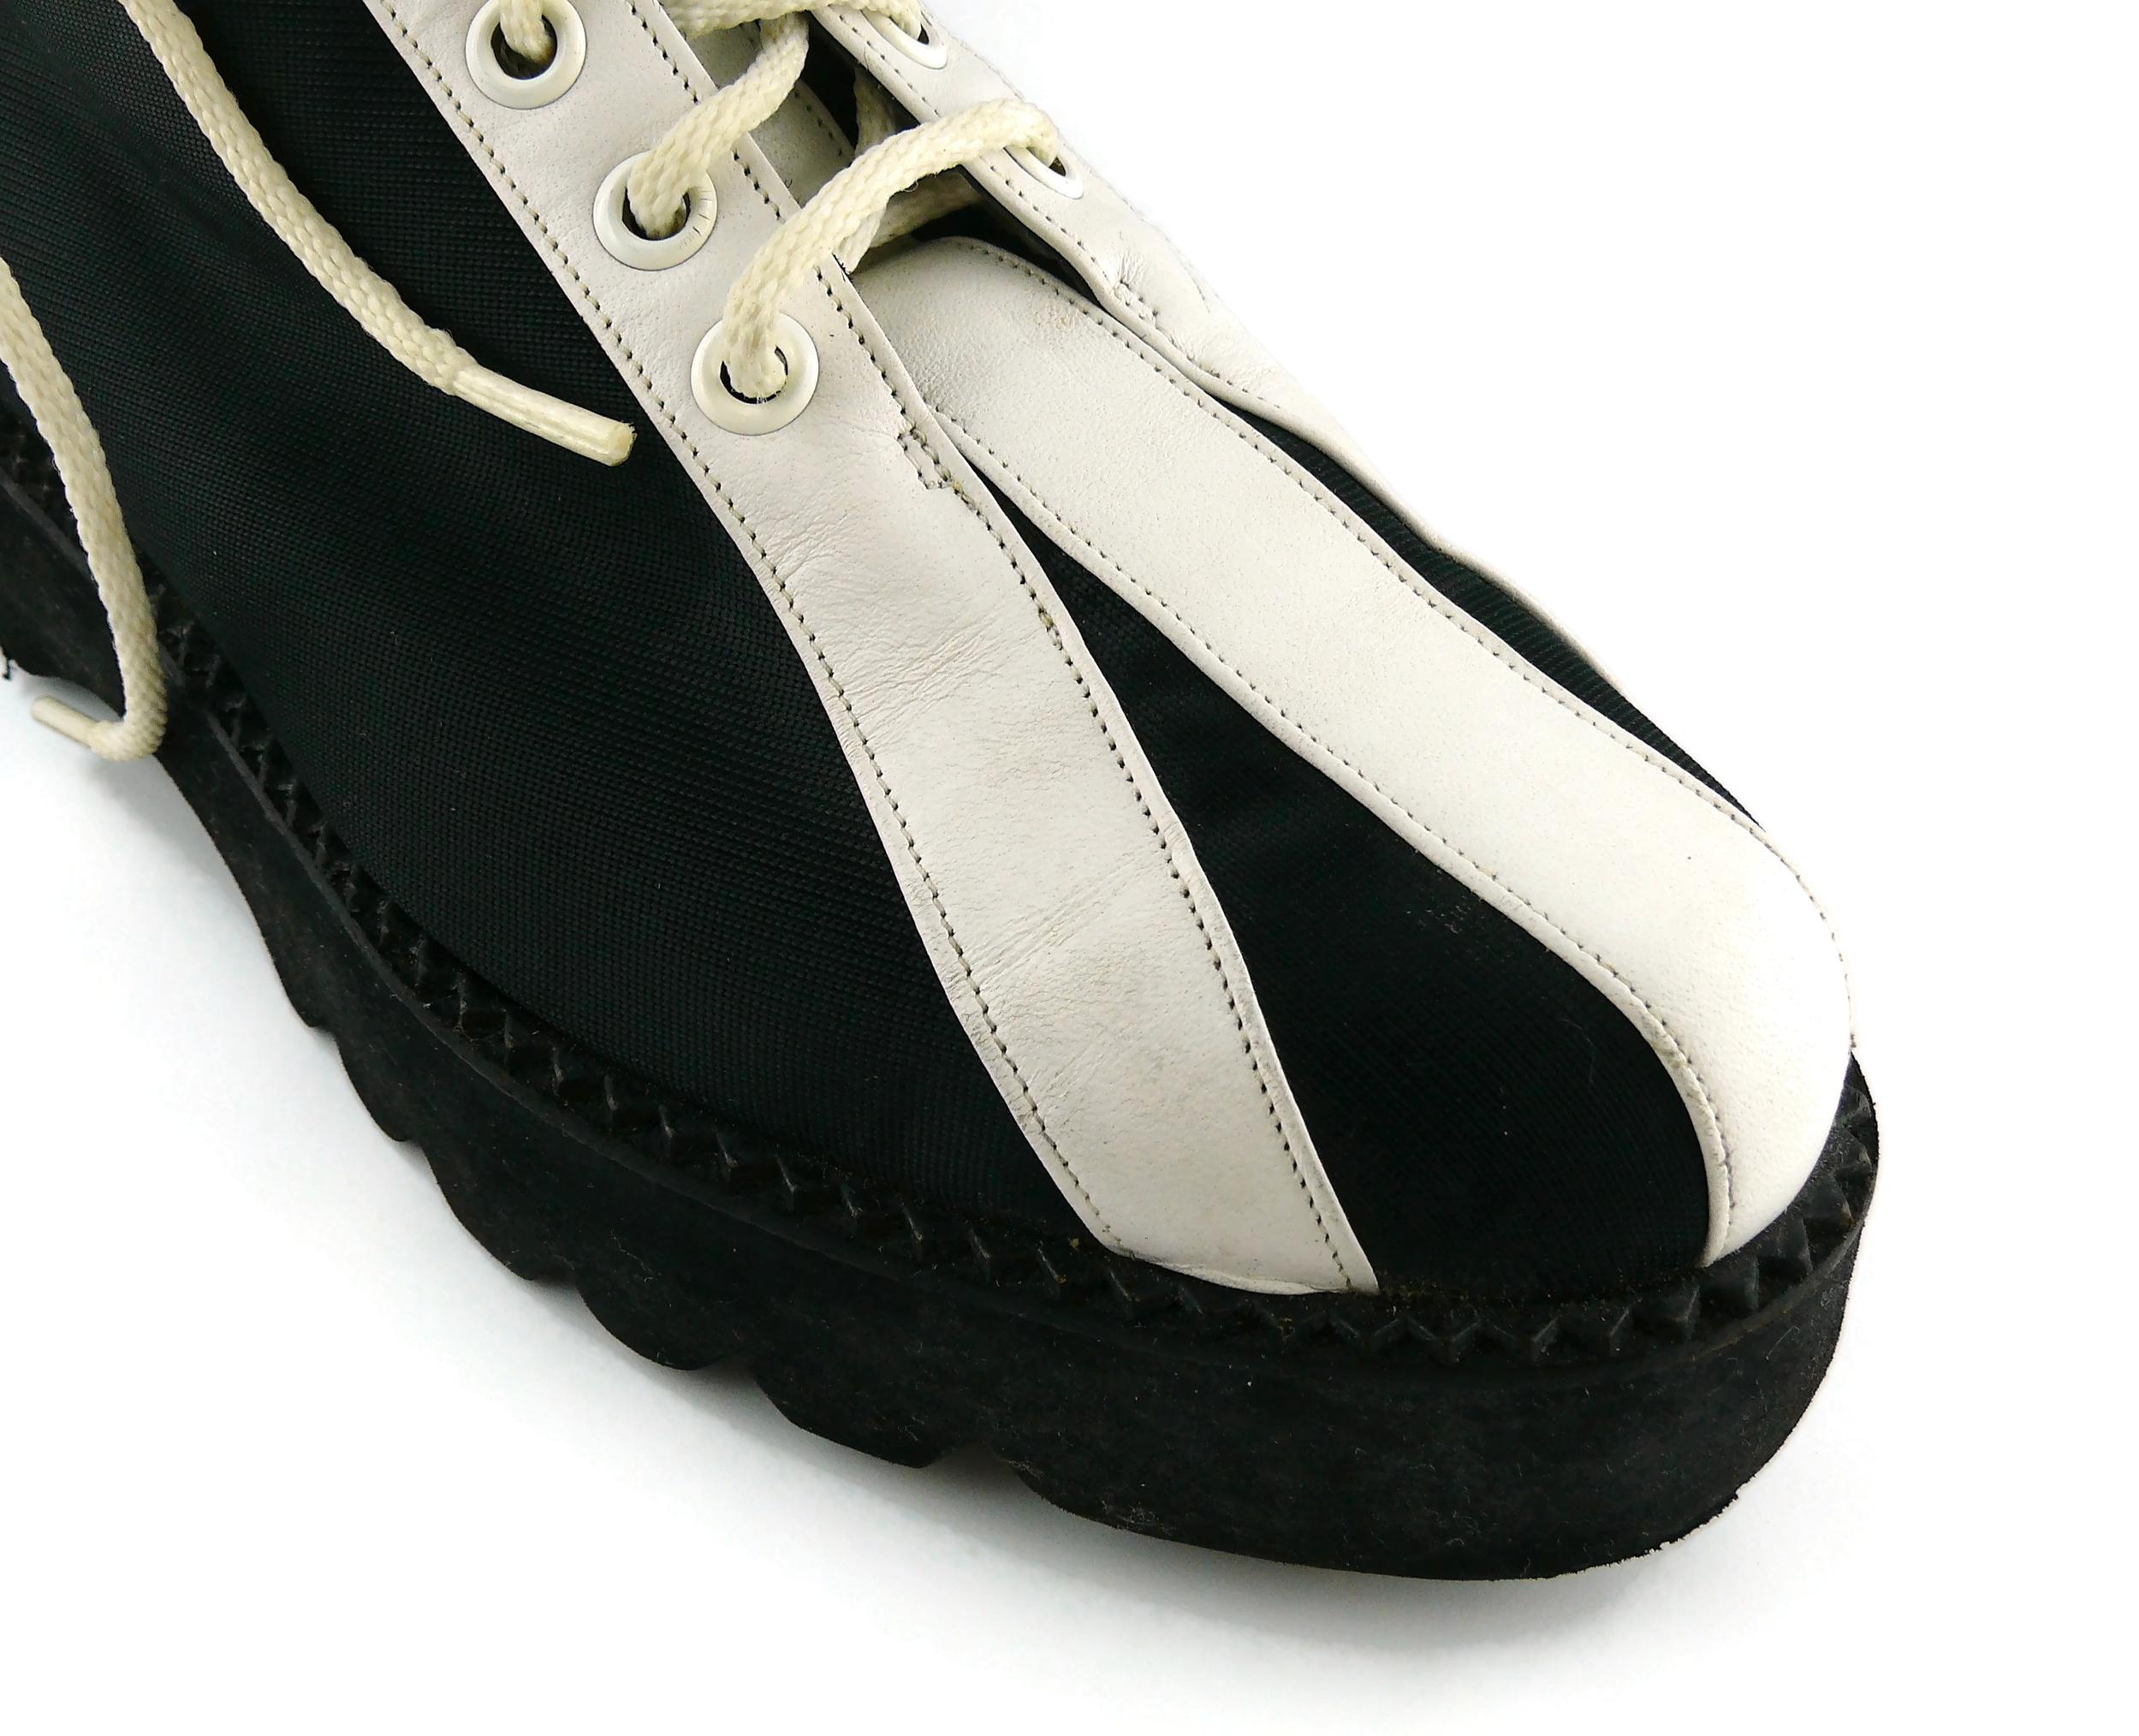 Karl Lagerfeld Vintage Black & White Lace Up Combat Boots 4